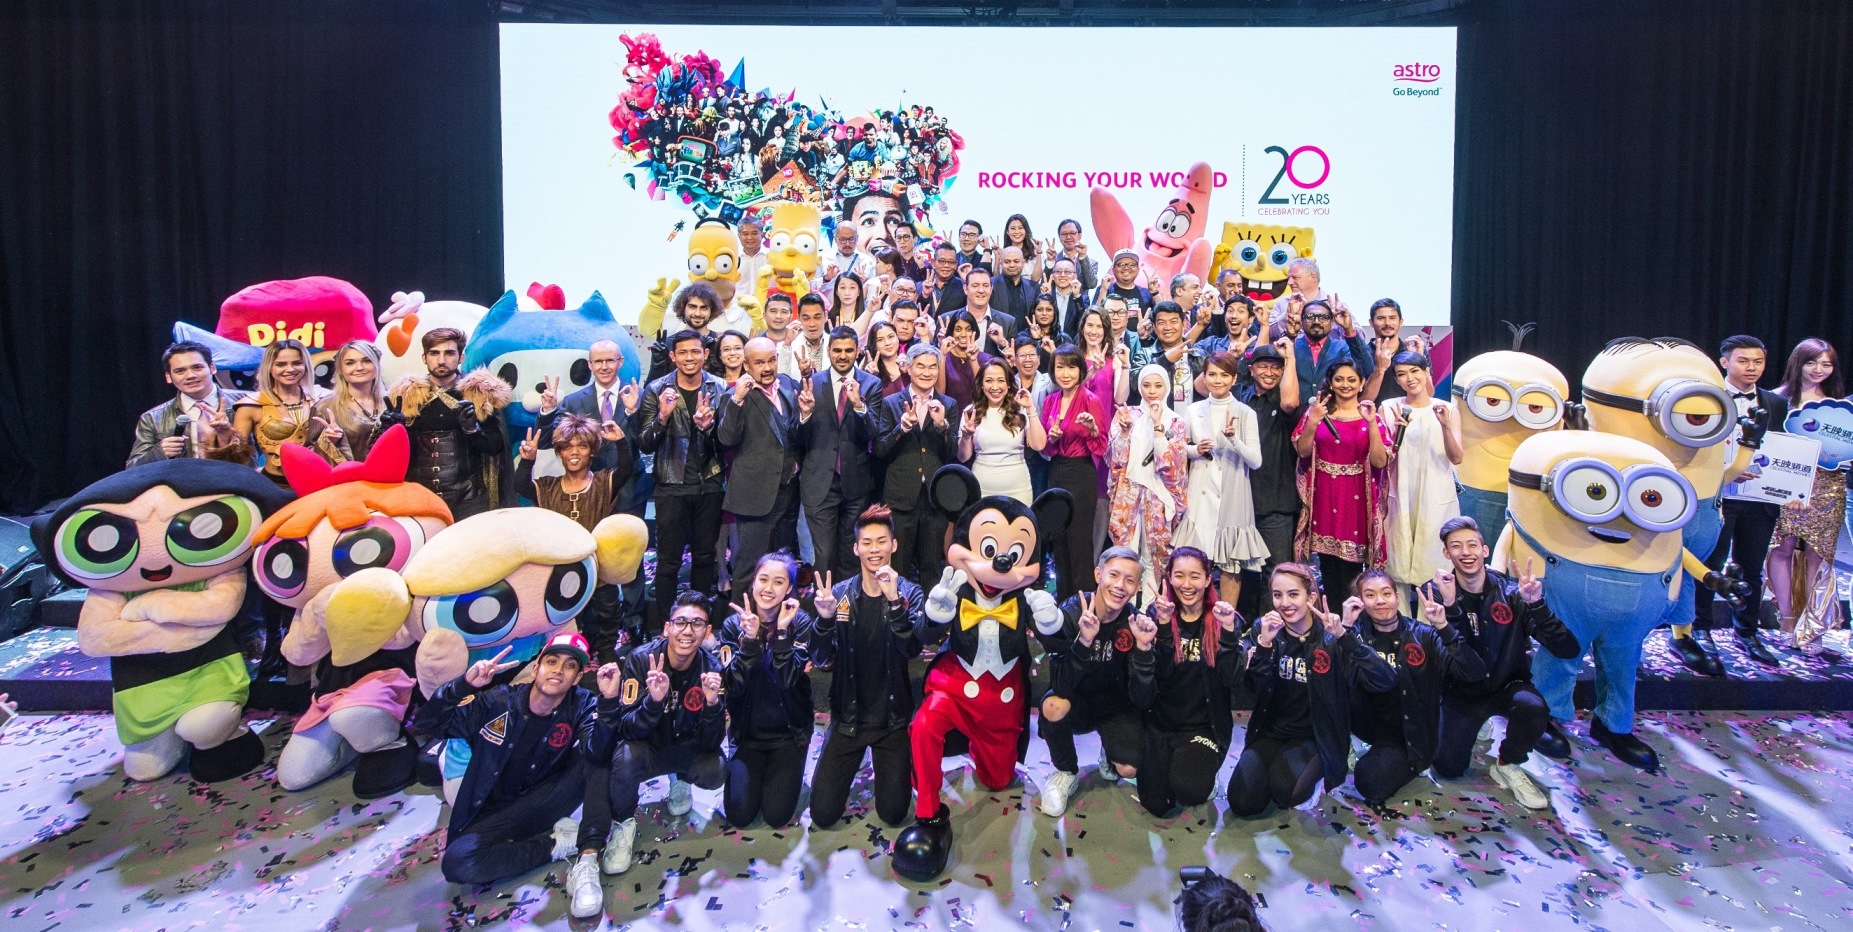 Astro Management, Talents, Channel Partners and Popular Characters at Astro's 20th Anniversary Celebration event.